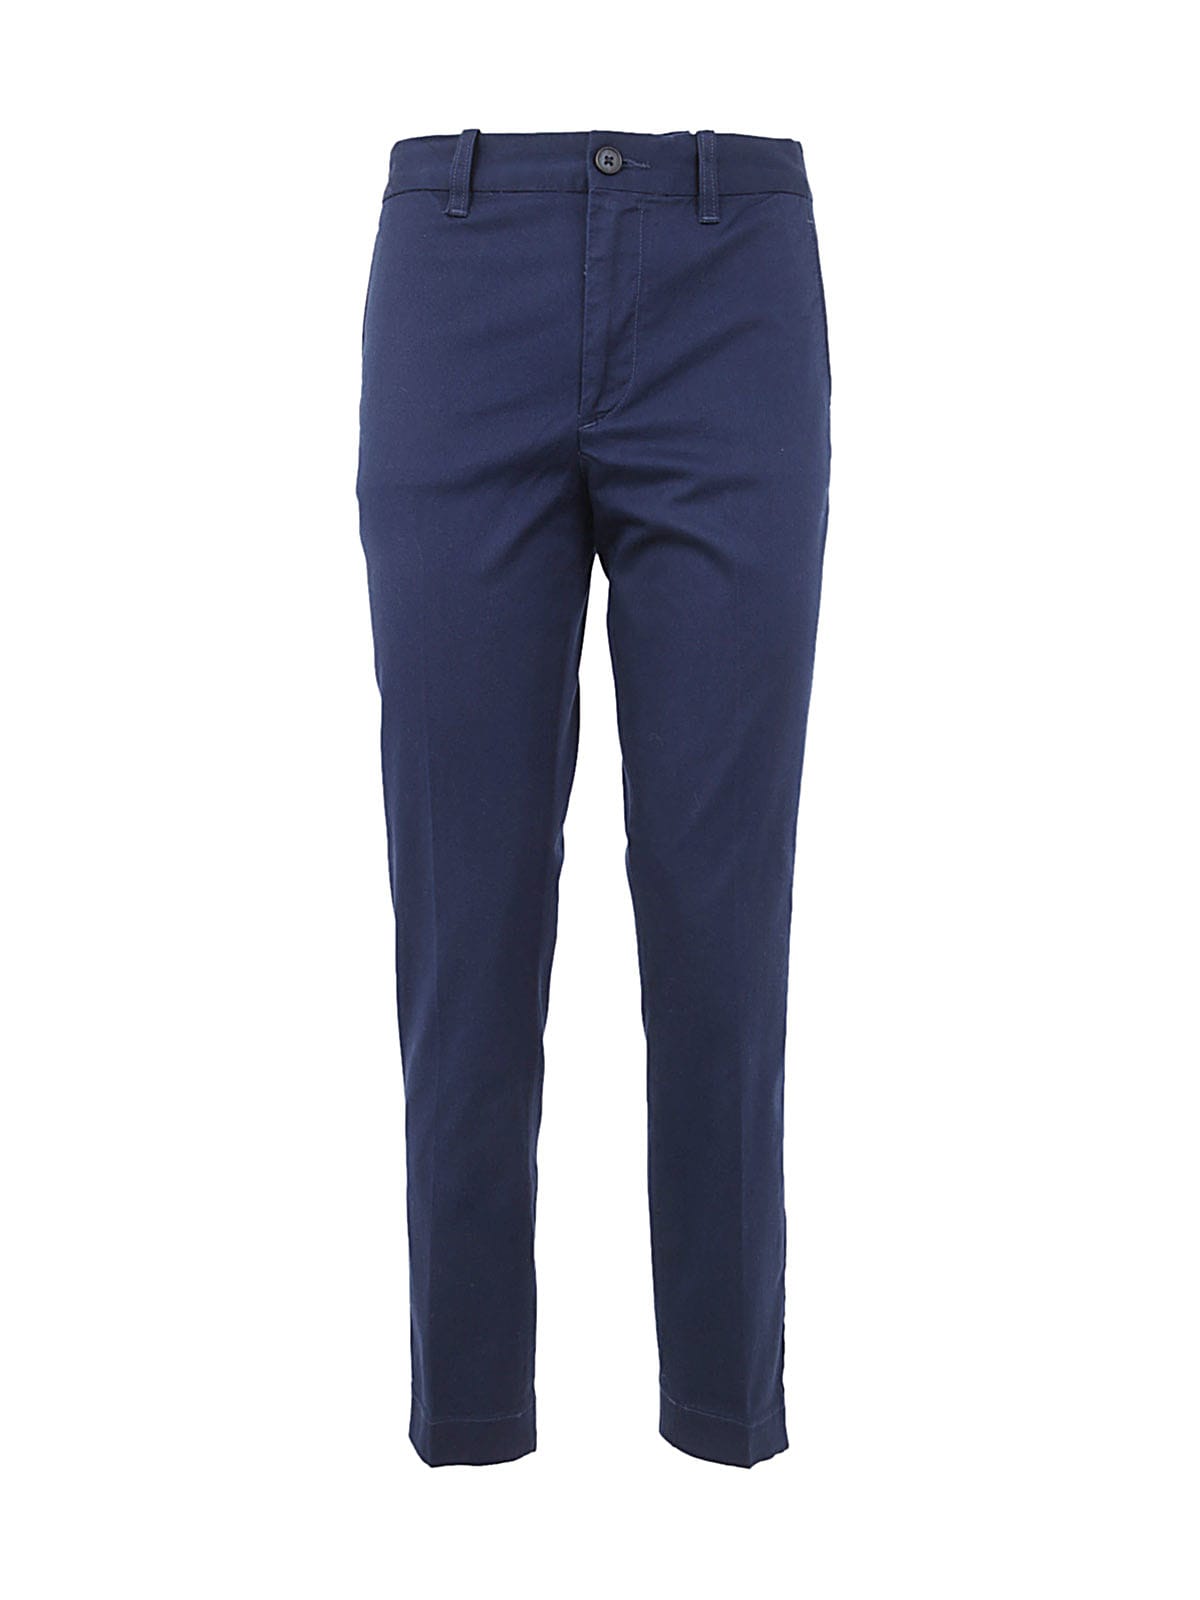 Shop Polo Ralph Lauren Ankle Slim Chino Trouser With Flat Front In Newport Navy